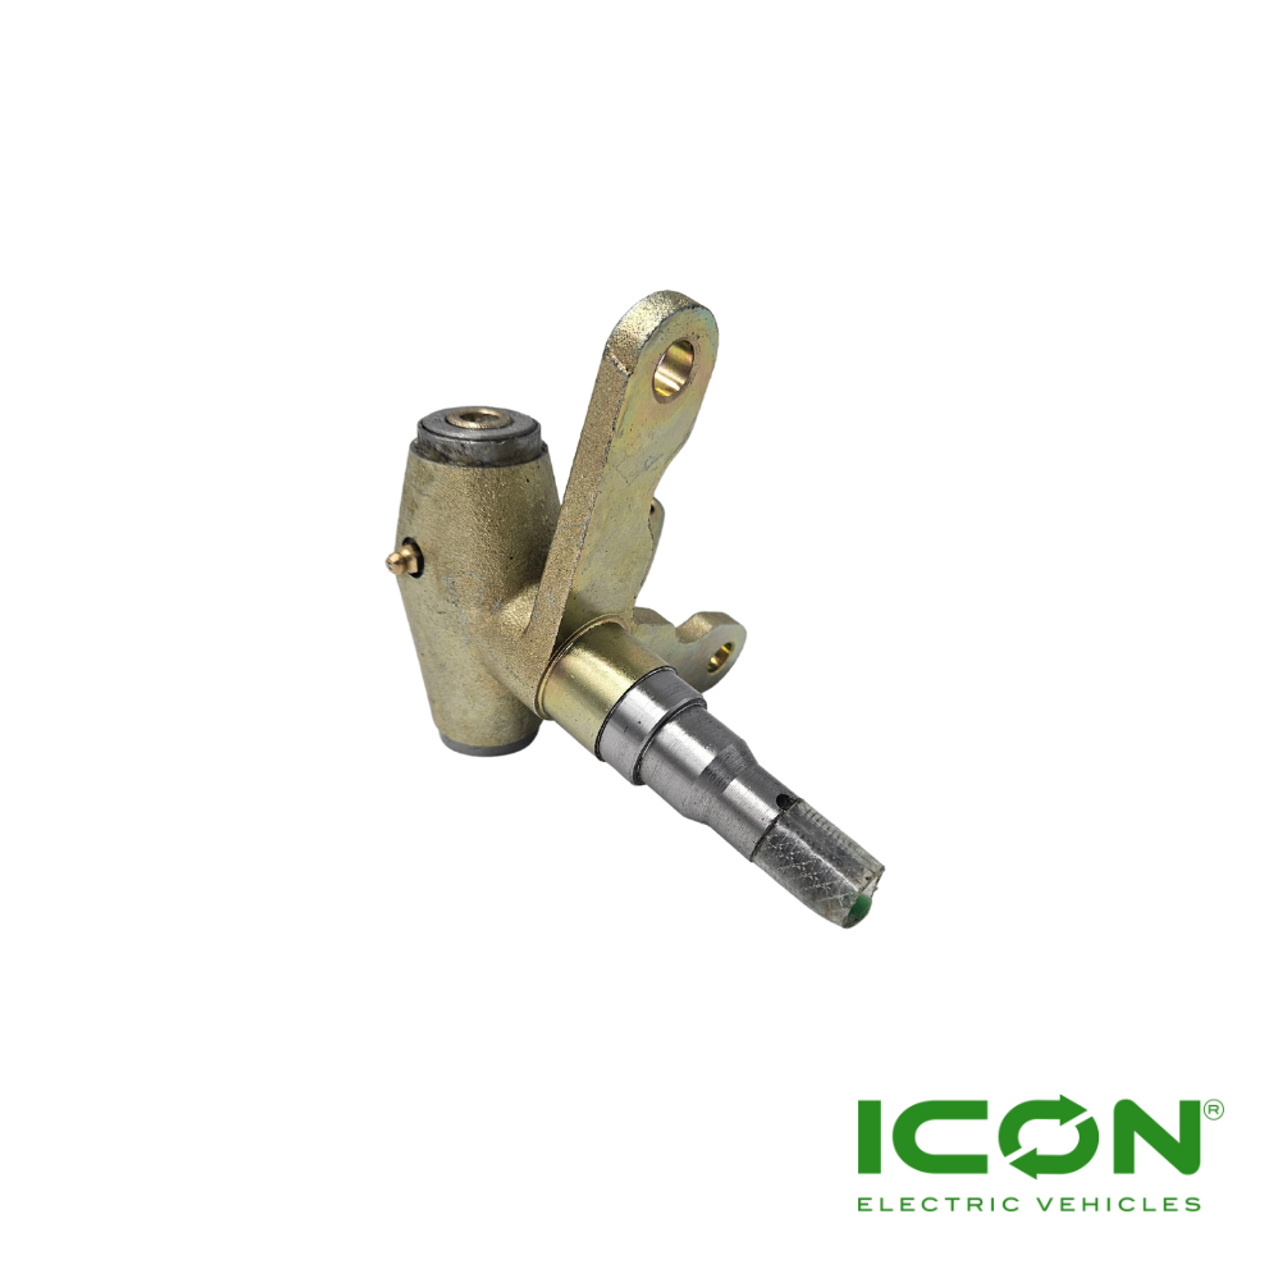 ICON Driver Side (Left) Spindle for ICON i20, i40, i60, i80 Golf Carts, SUS-712-IC, 3.01.005.010005, 3.206.09.000012